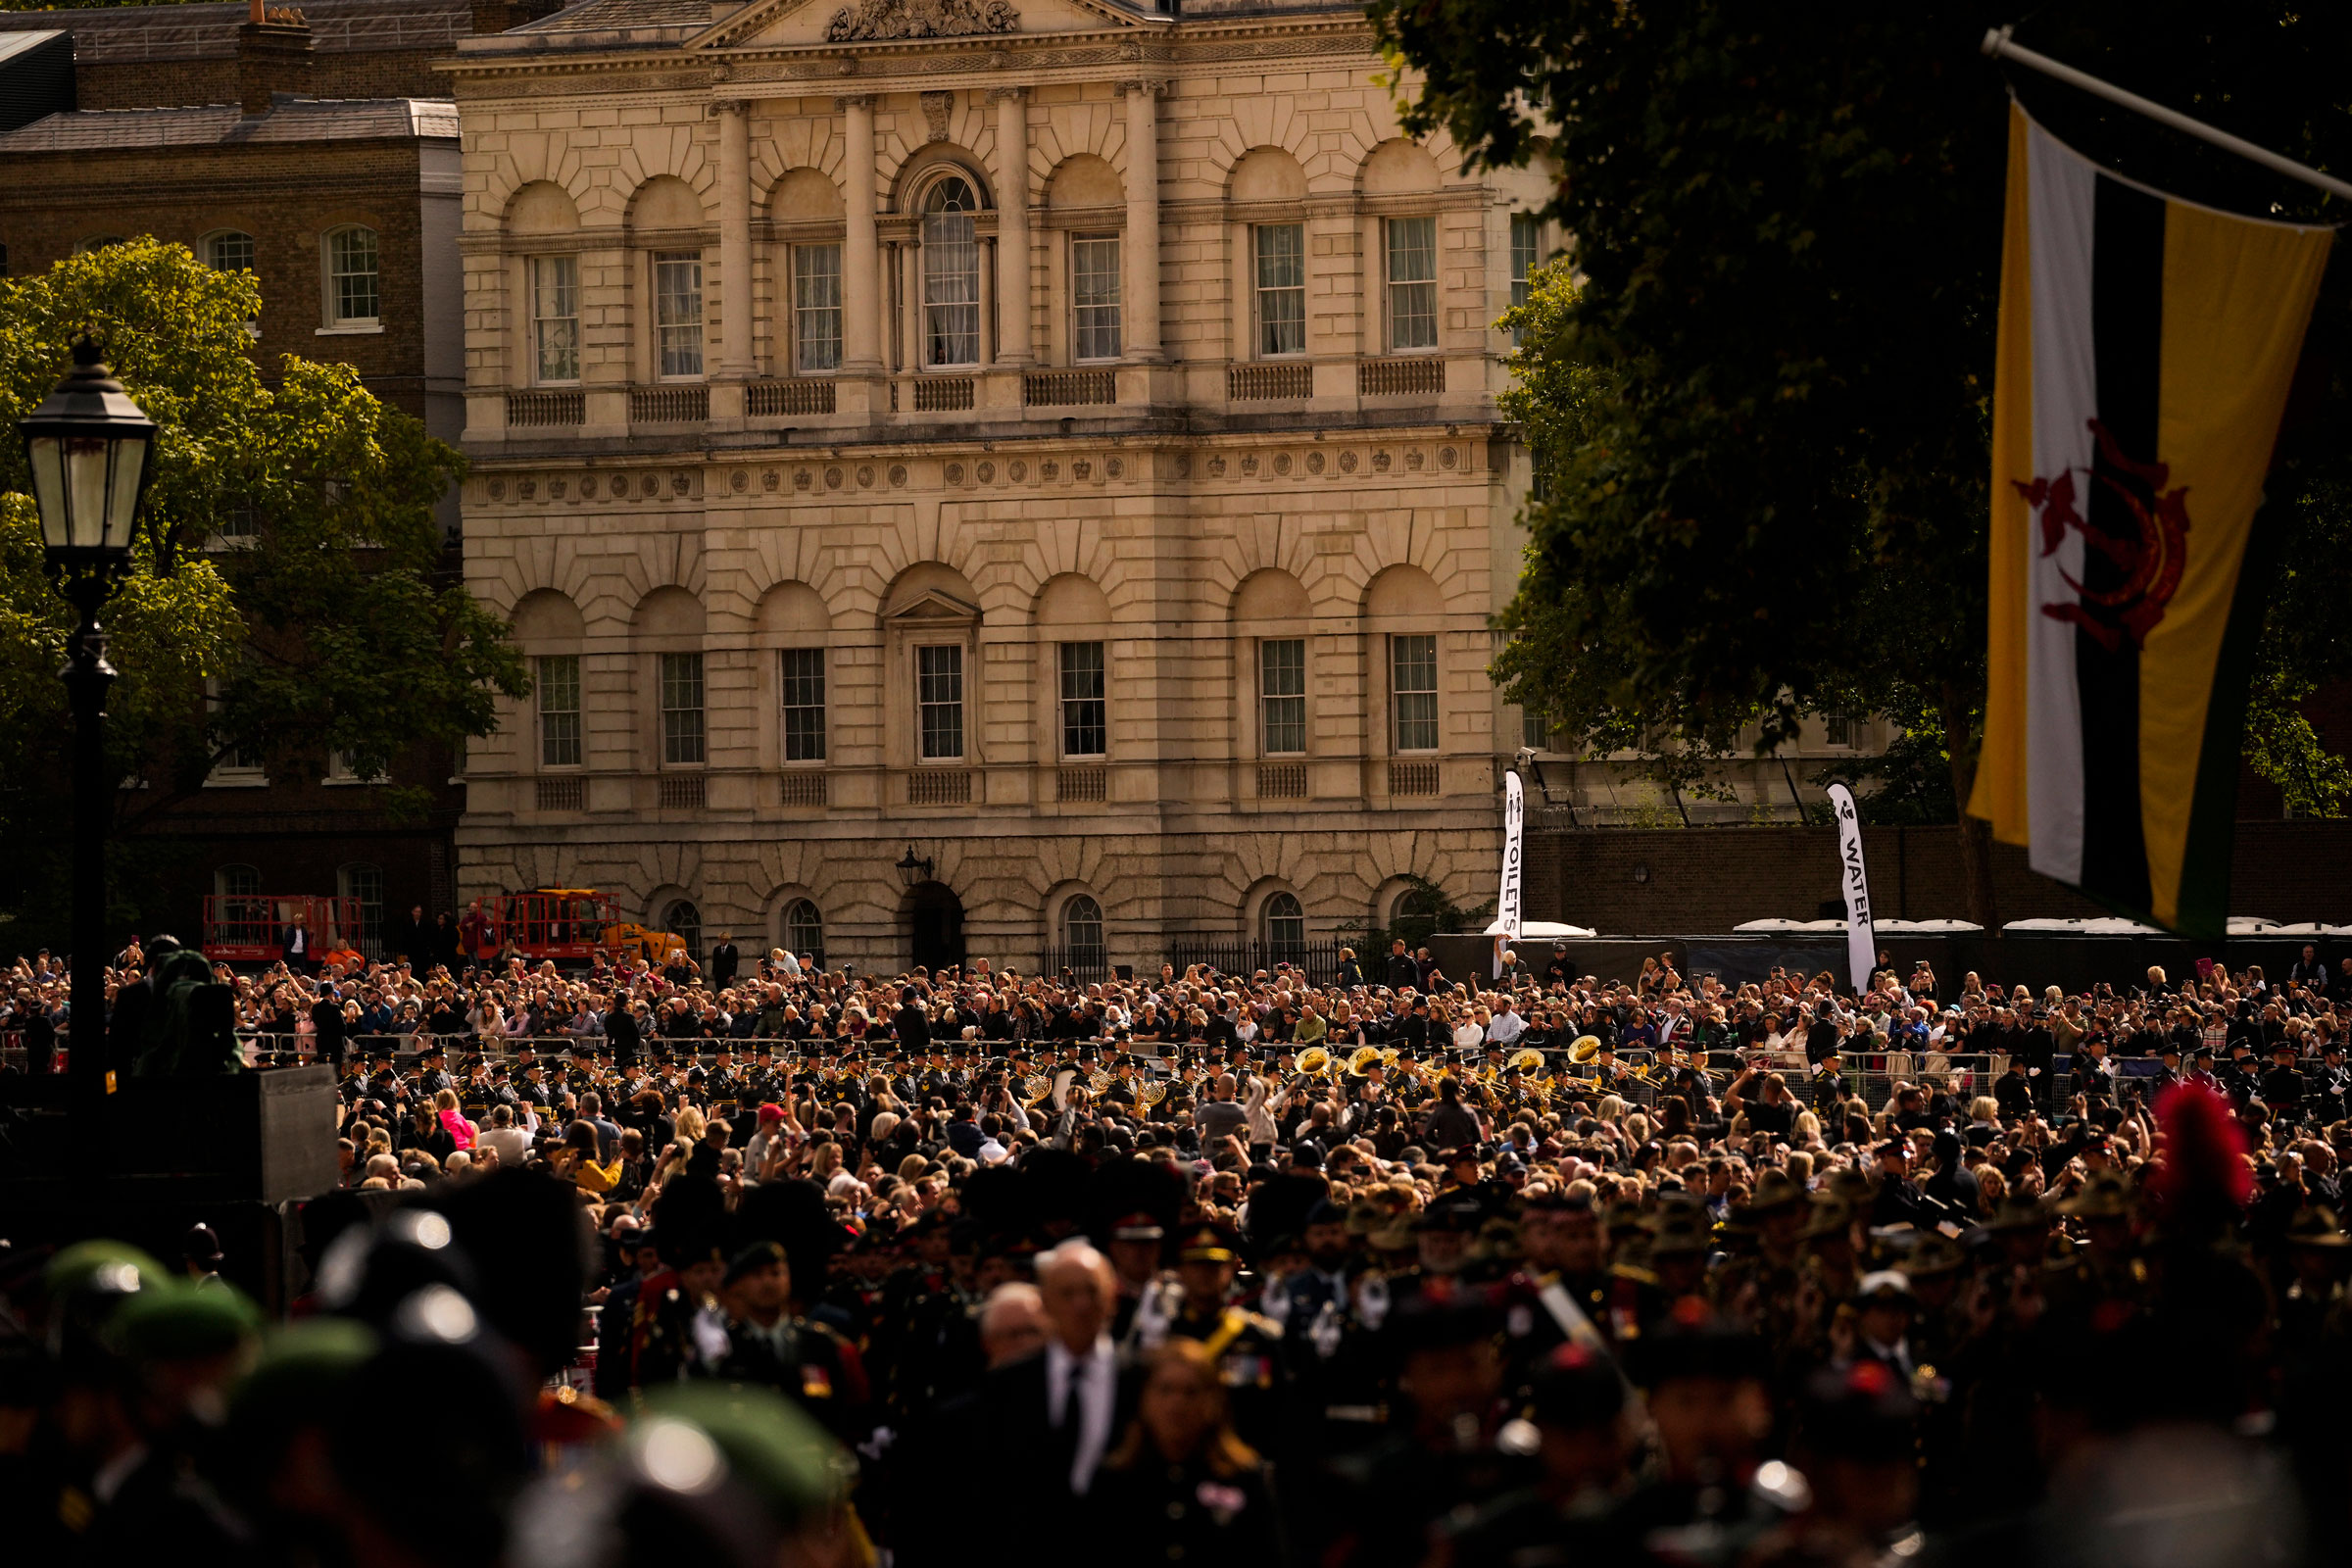 People gather prior to the Queen Elizabeth II funeral in central London.